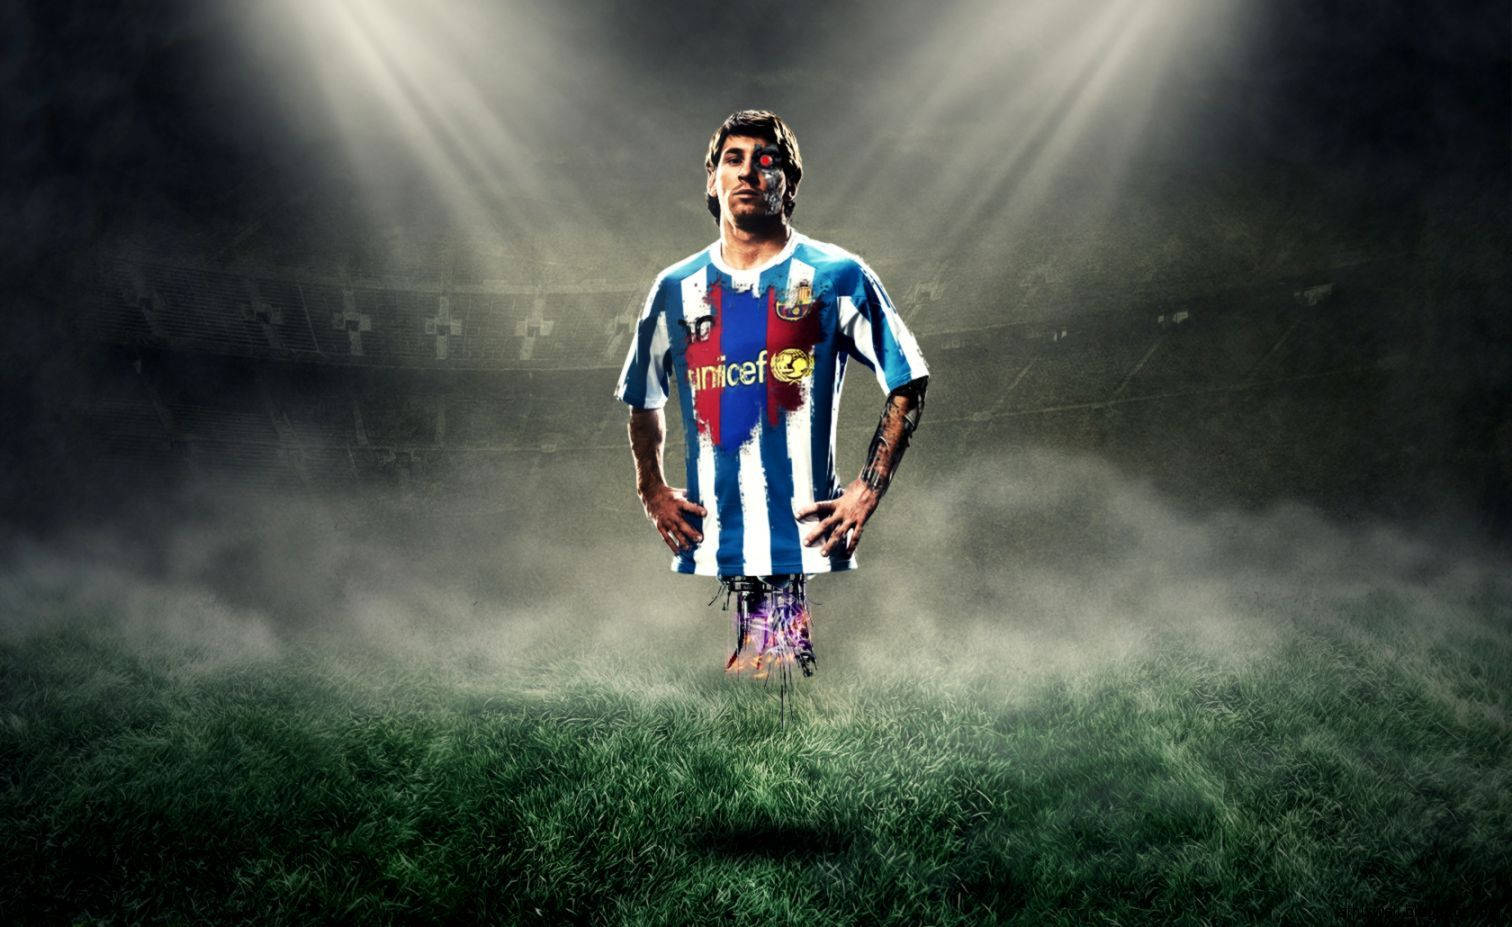 Cool Soccer Player Cyborg Messi